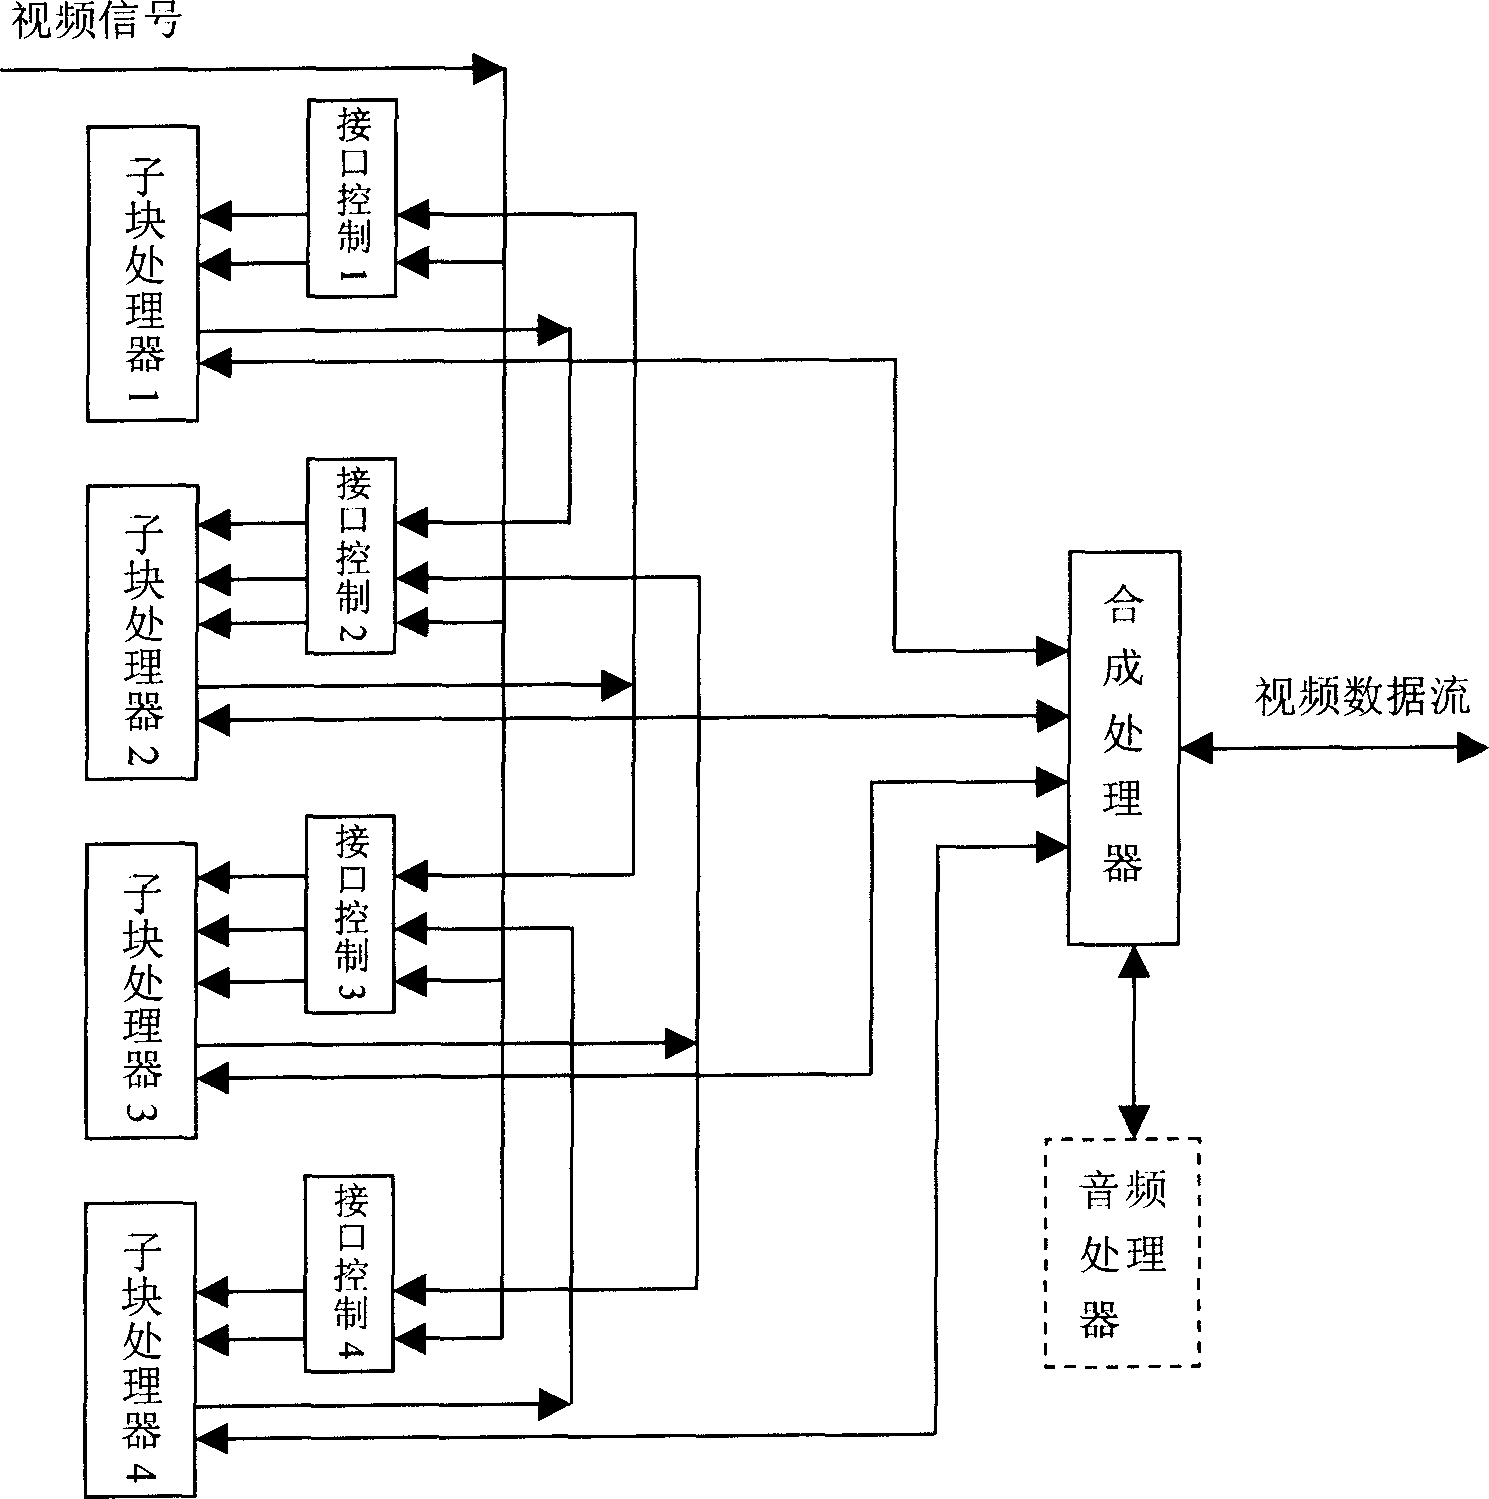 Video frequency signal multi-processor parallel processing method